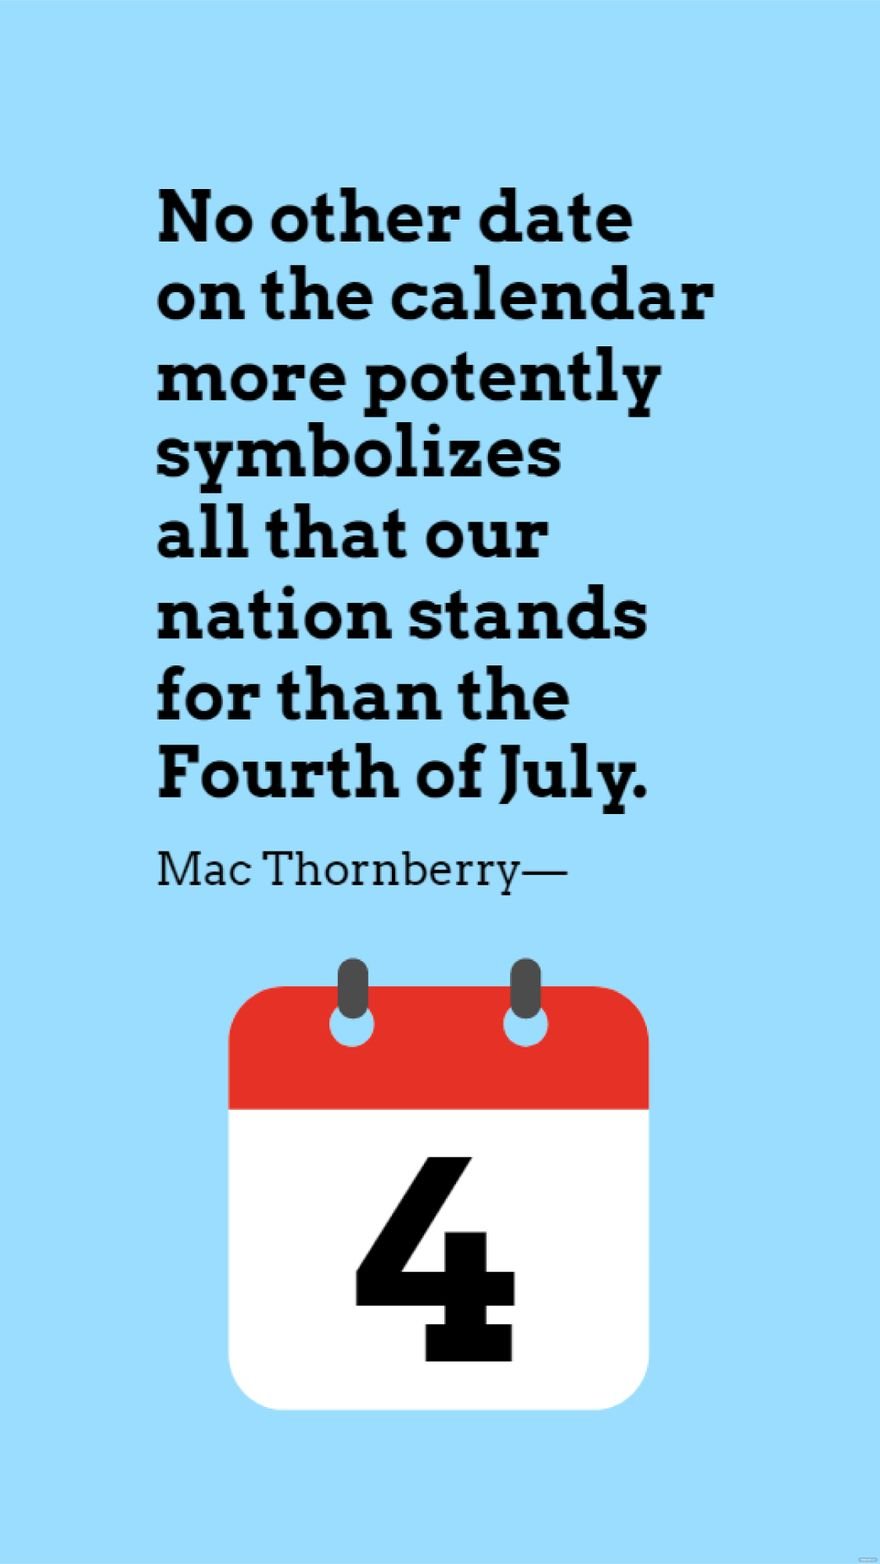 Free Mac Thornberry - No other date on the calendar more potently symbolizes all that our nation stands for than the Fourth of July.